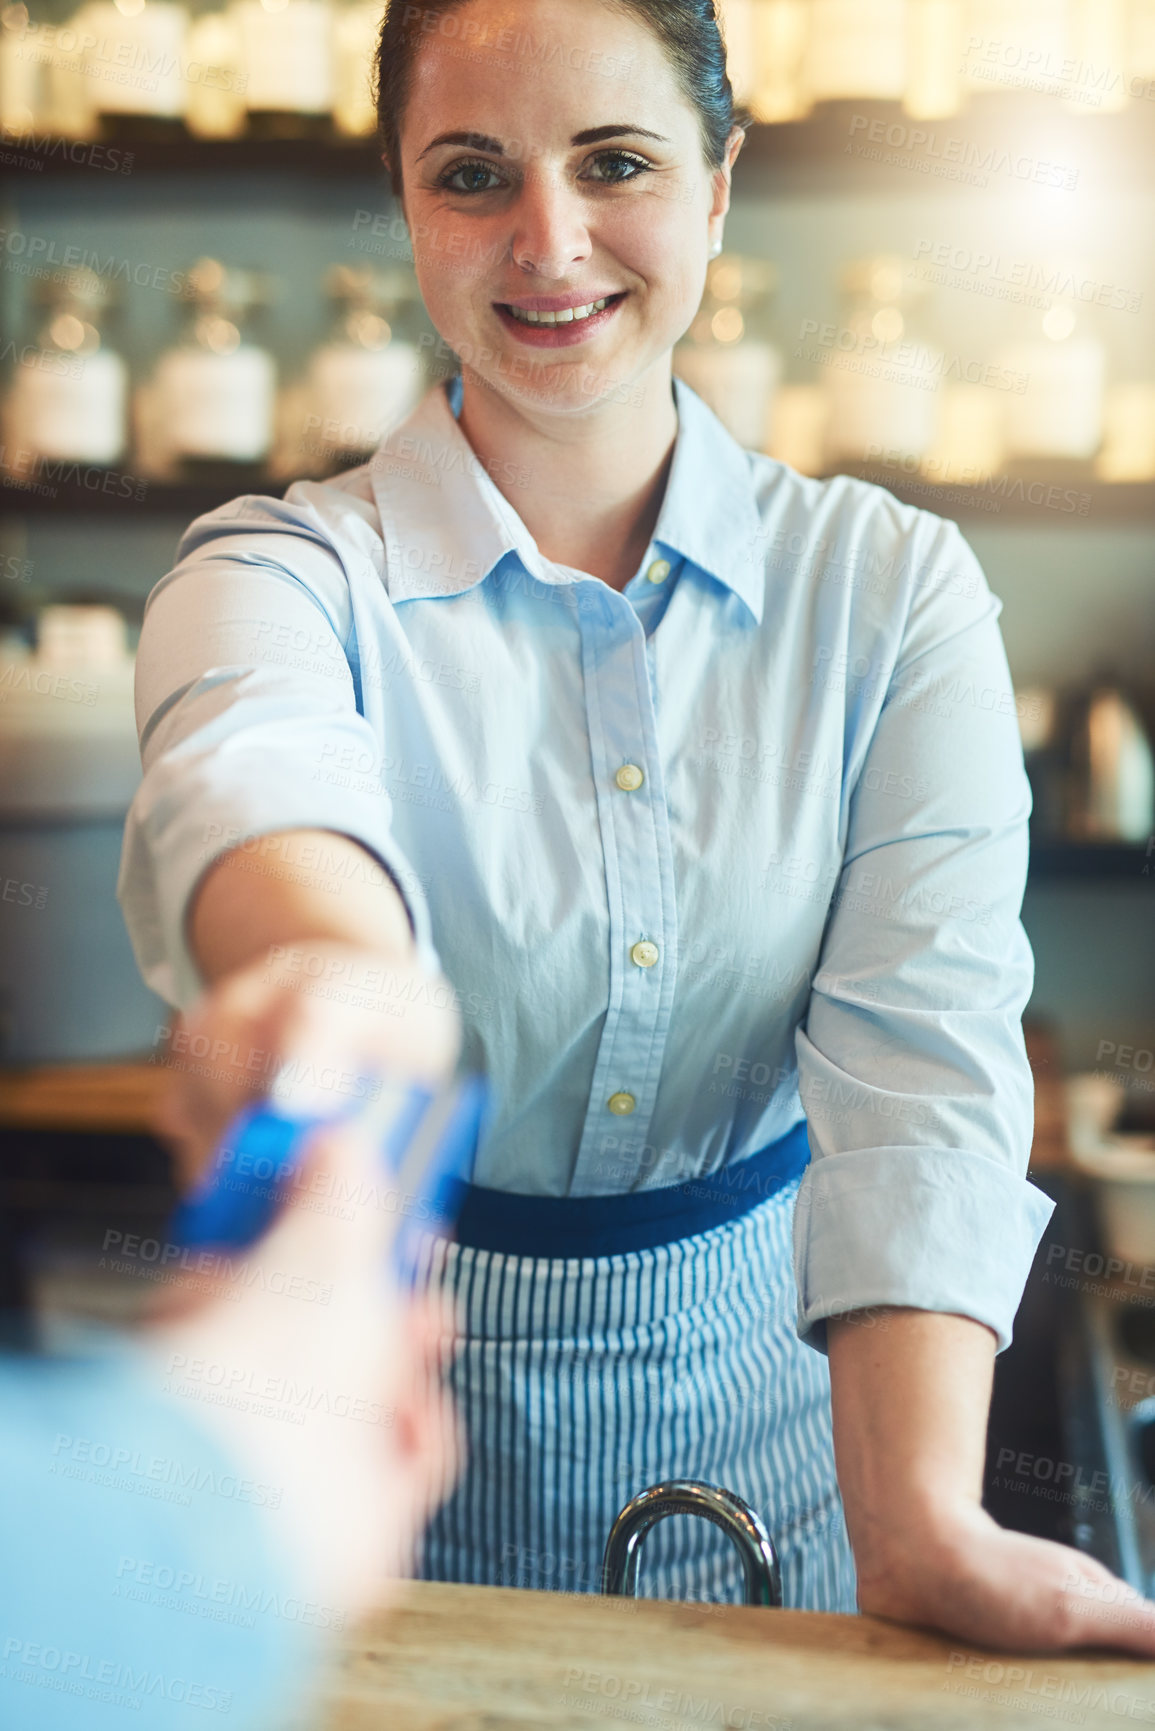 Buy stock photo Portrait of a young woman receiving a credit card payment from a customer in a cafe